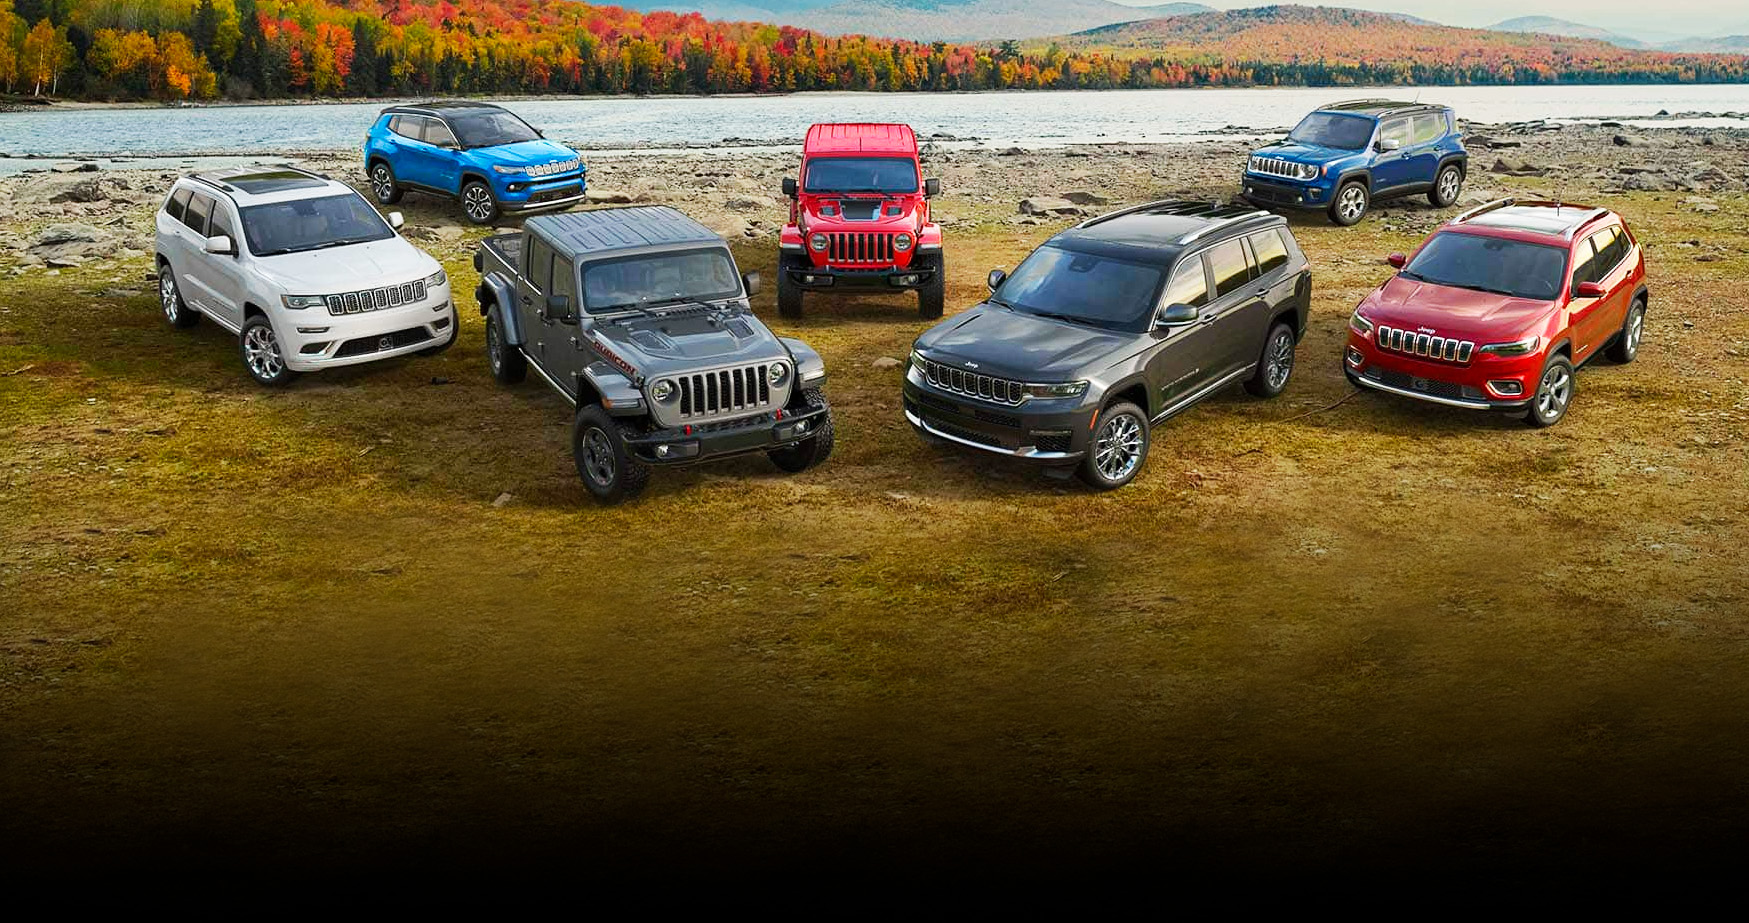 If you want an iconic Jeep that's unmistakable and perfect for any lifestyle, stop by Louisville Chrysler Dodge Jeep RAM.